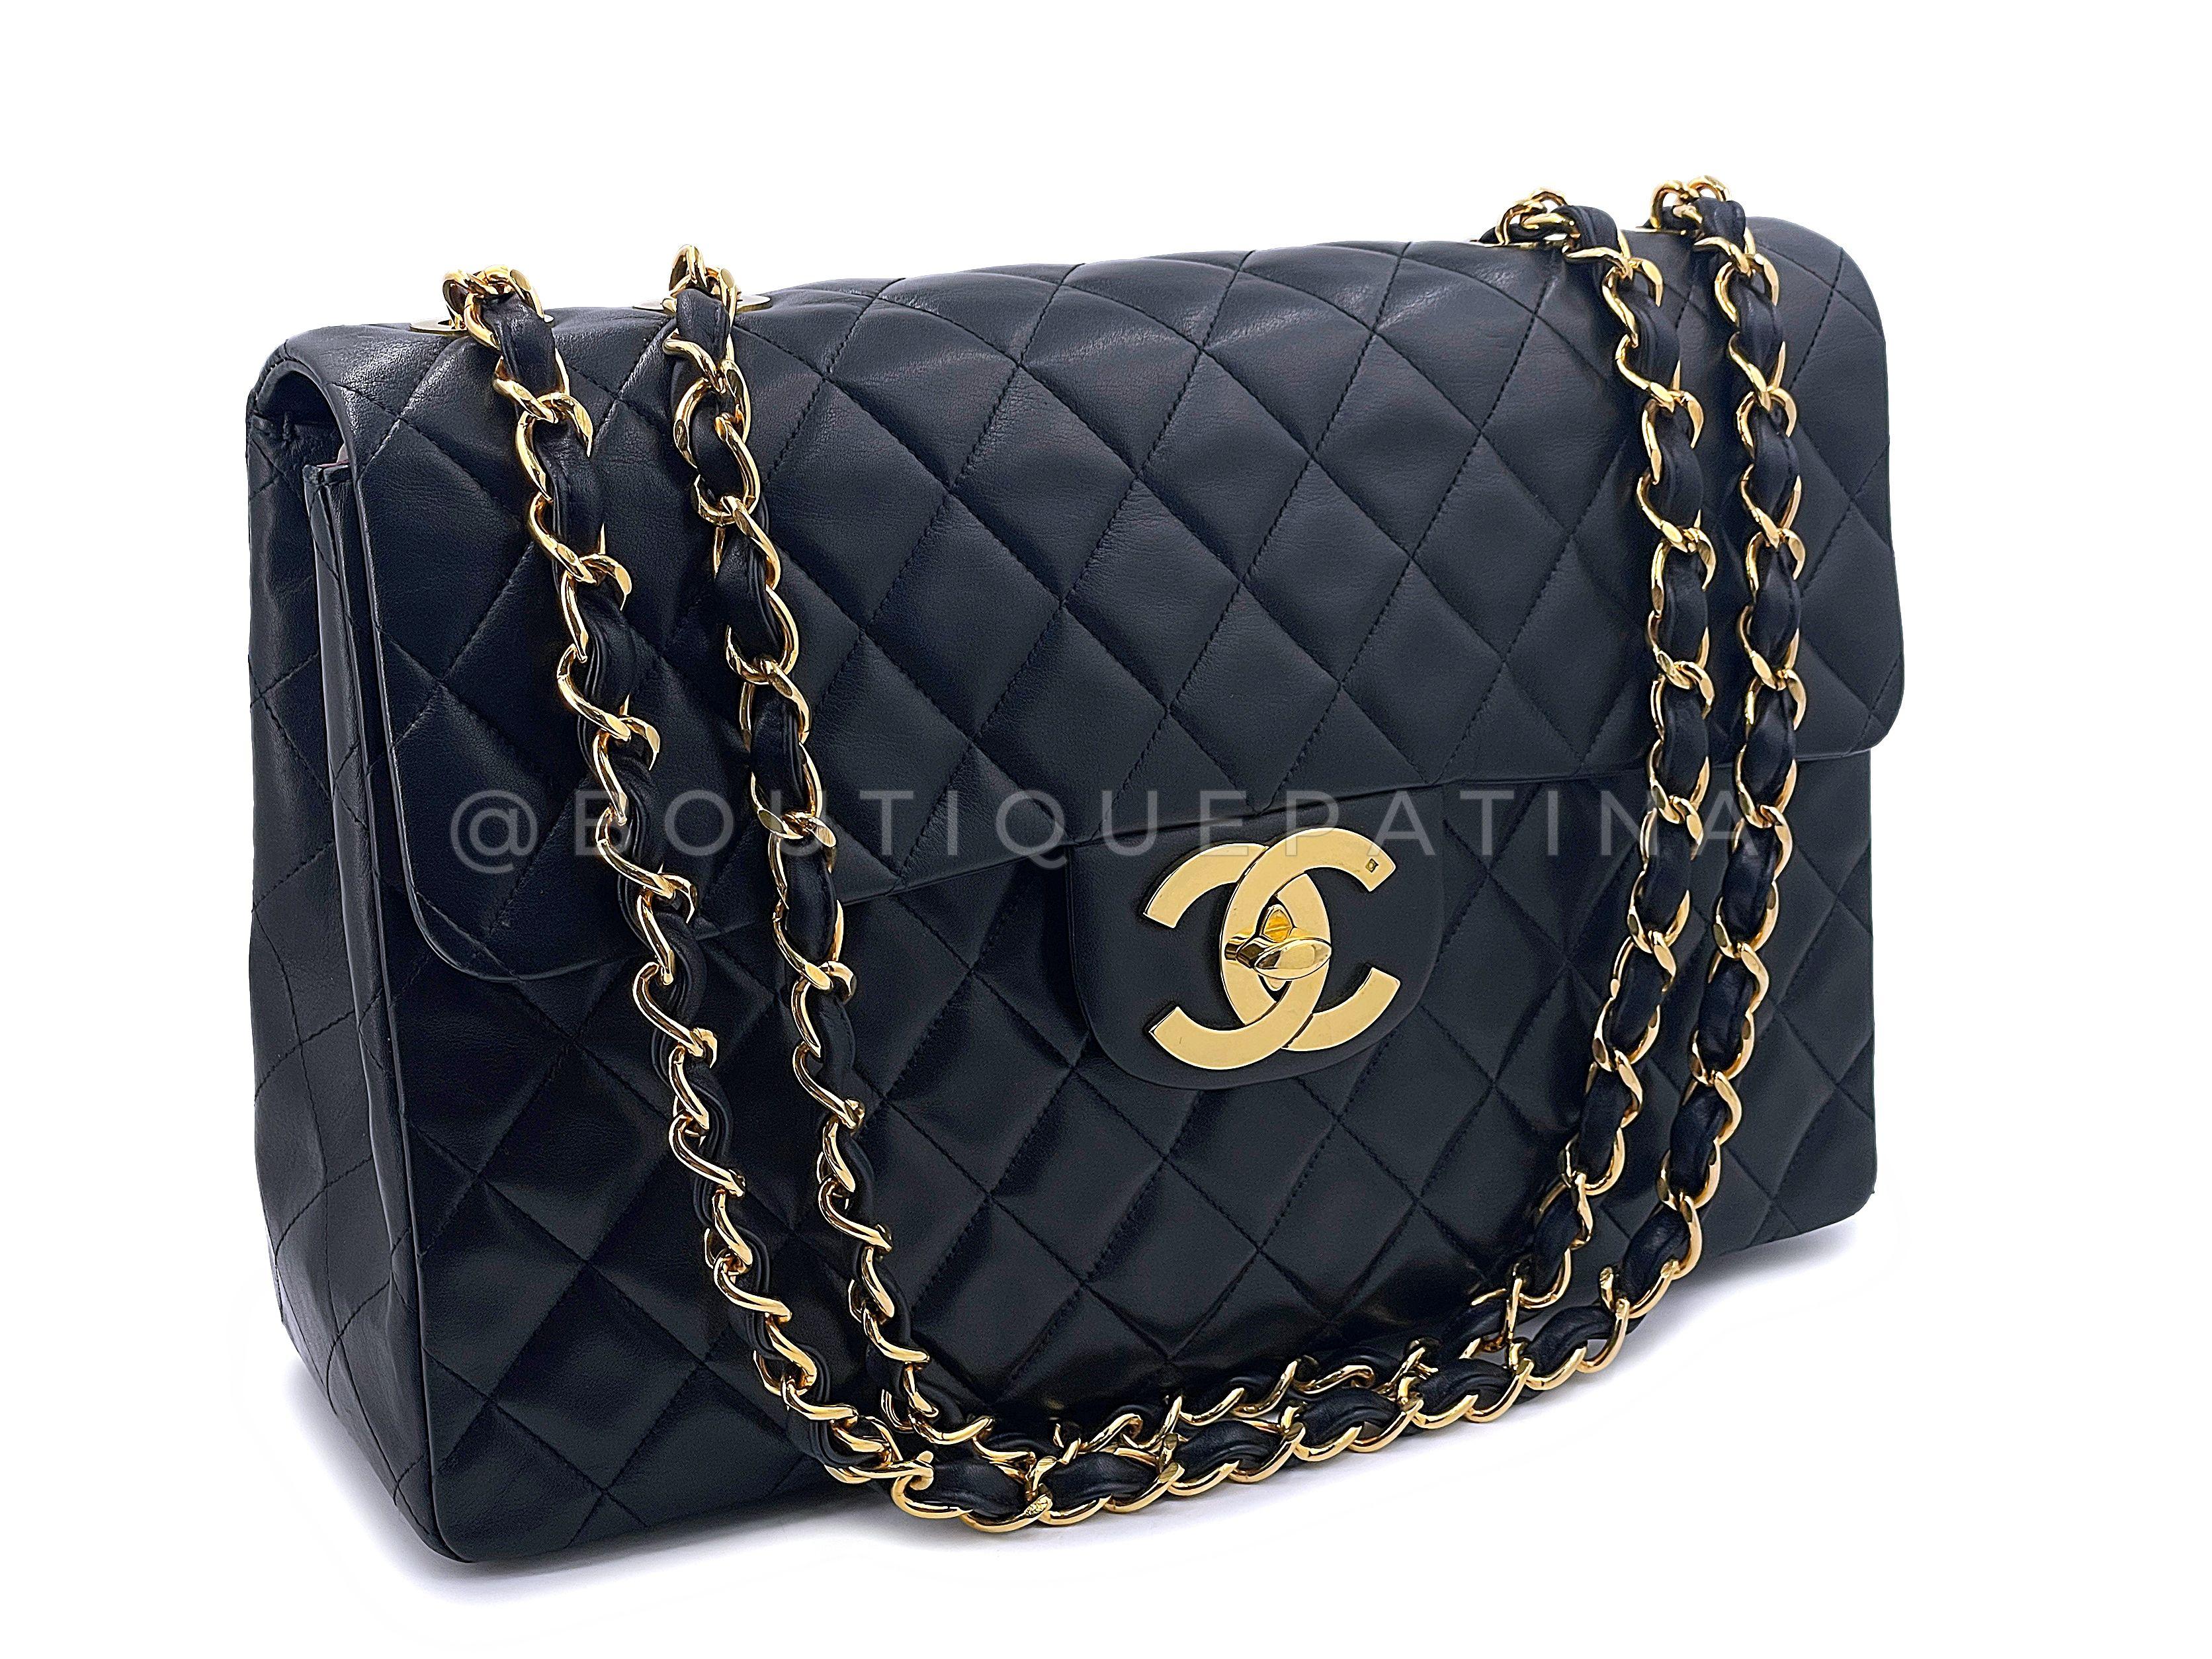 Store item: 67598
Every vintage Chanel enthusiast knows how difficult it is to find this exact model with minimal creases and maximum puff, but this is one of our goals at Boutique Patina - to deliver 30- and 40-year old excellent-pristine vintage